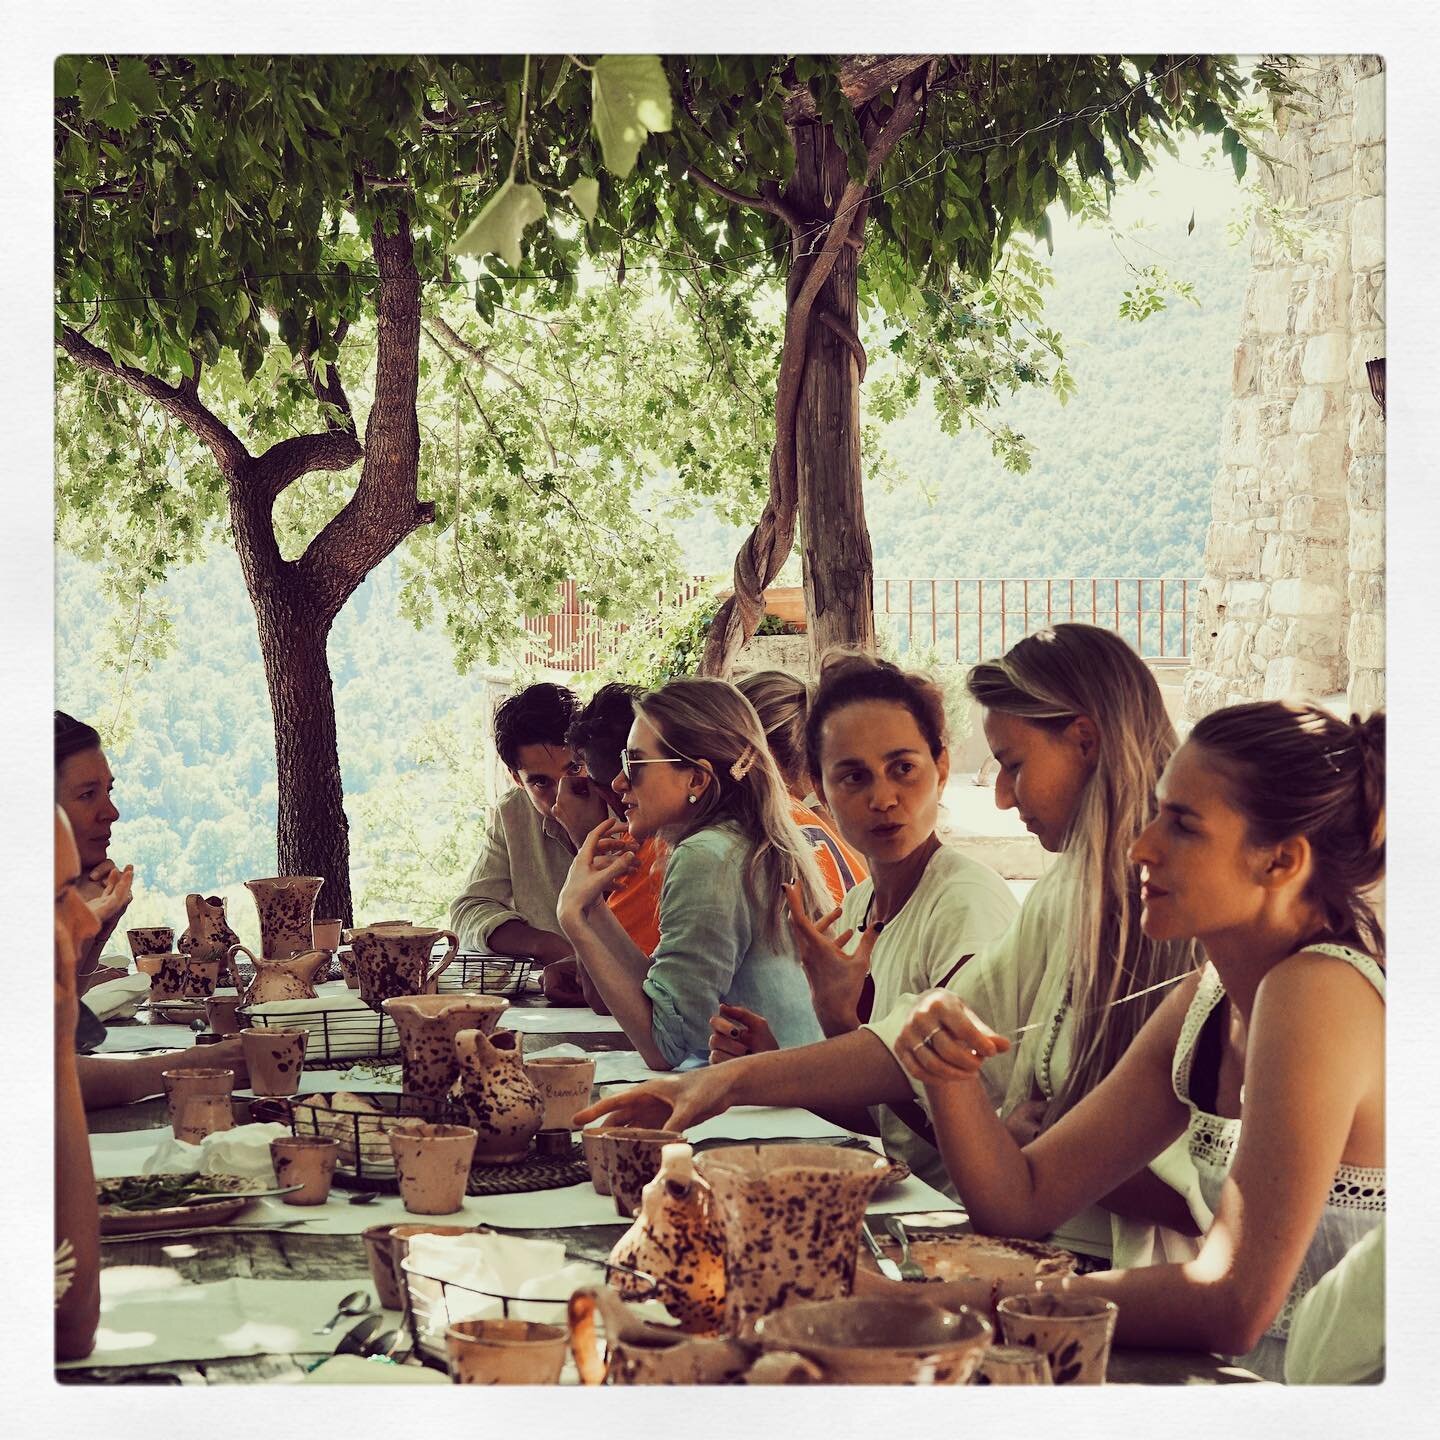 Long table lunch at Eremito in Umbria, Italy. 🇮🇹 
A &lsquo;signature&rsquo; of our retreats is our long table meals together. Time to drop in and connect with new friends, integrate the experiences of the day and relax with the comfort of being hel